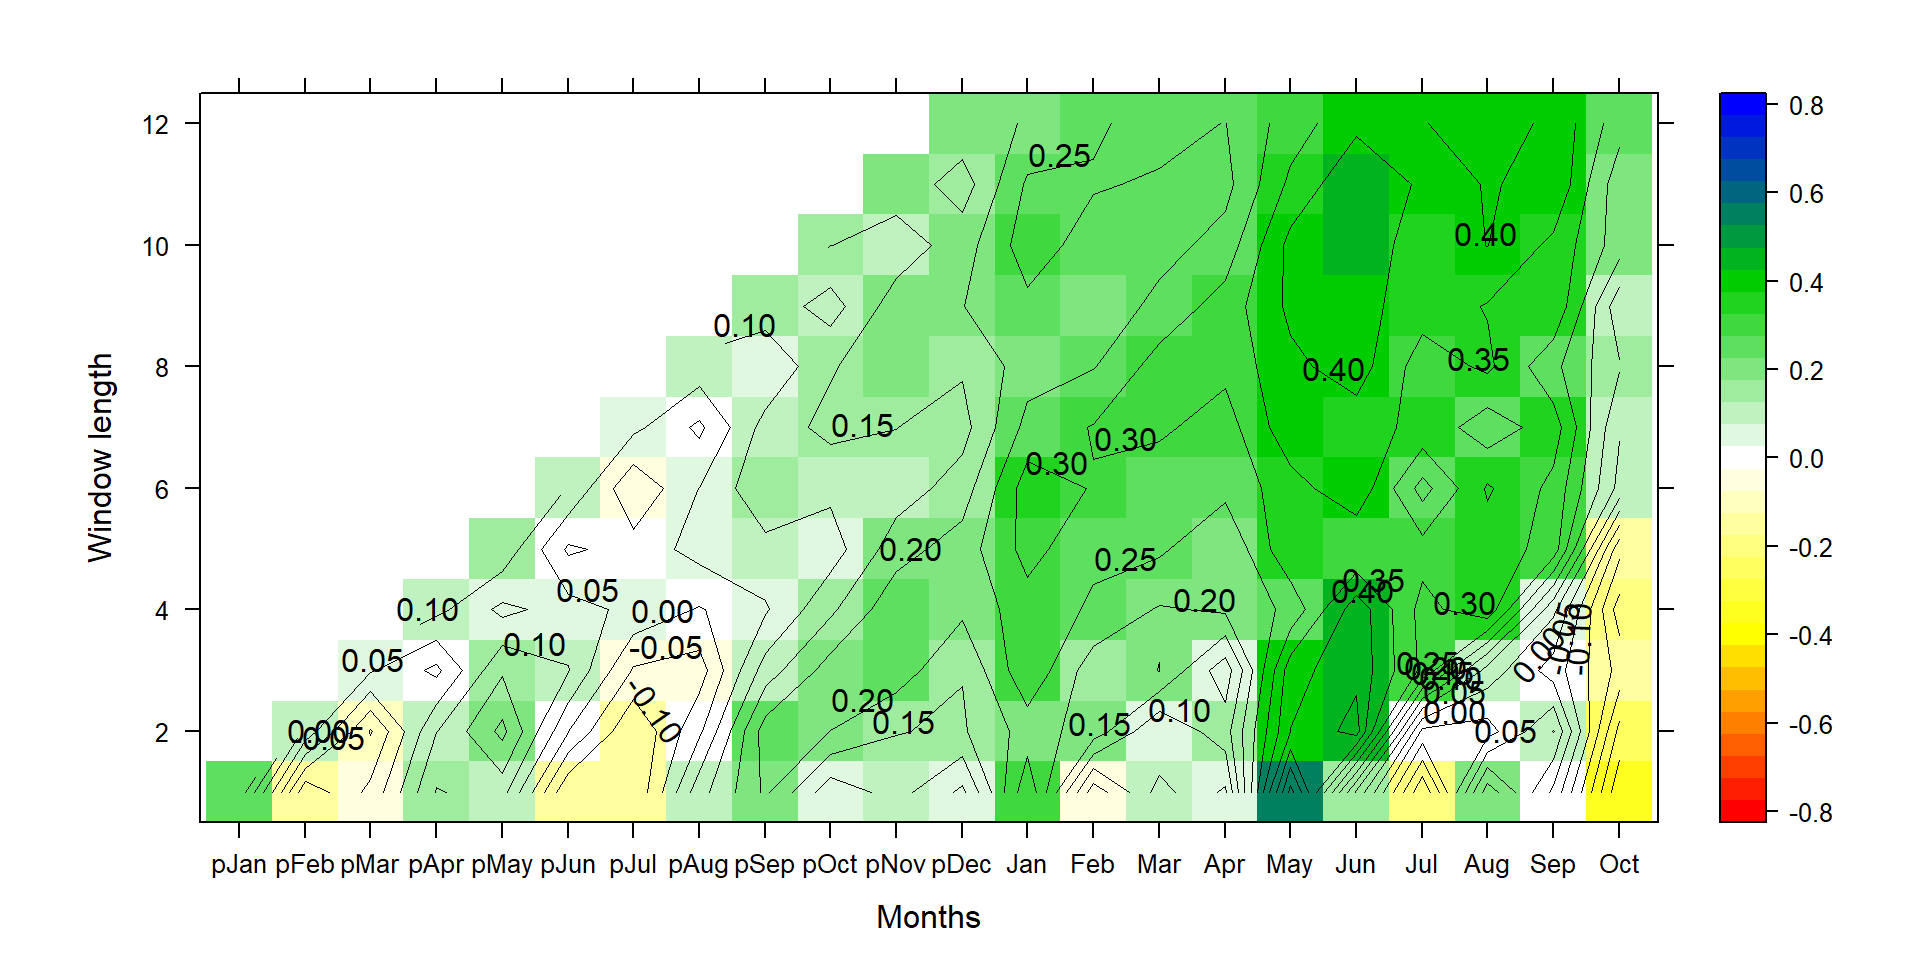 This graph shows climate-growth correlations for different end months (along the x-axis) and different season lengths (y-axis). Positive correlations are shown in green and blue, and negative correlations in yellow to redish colors.